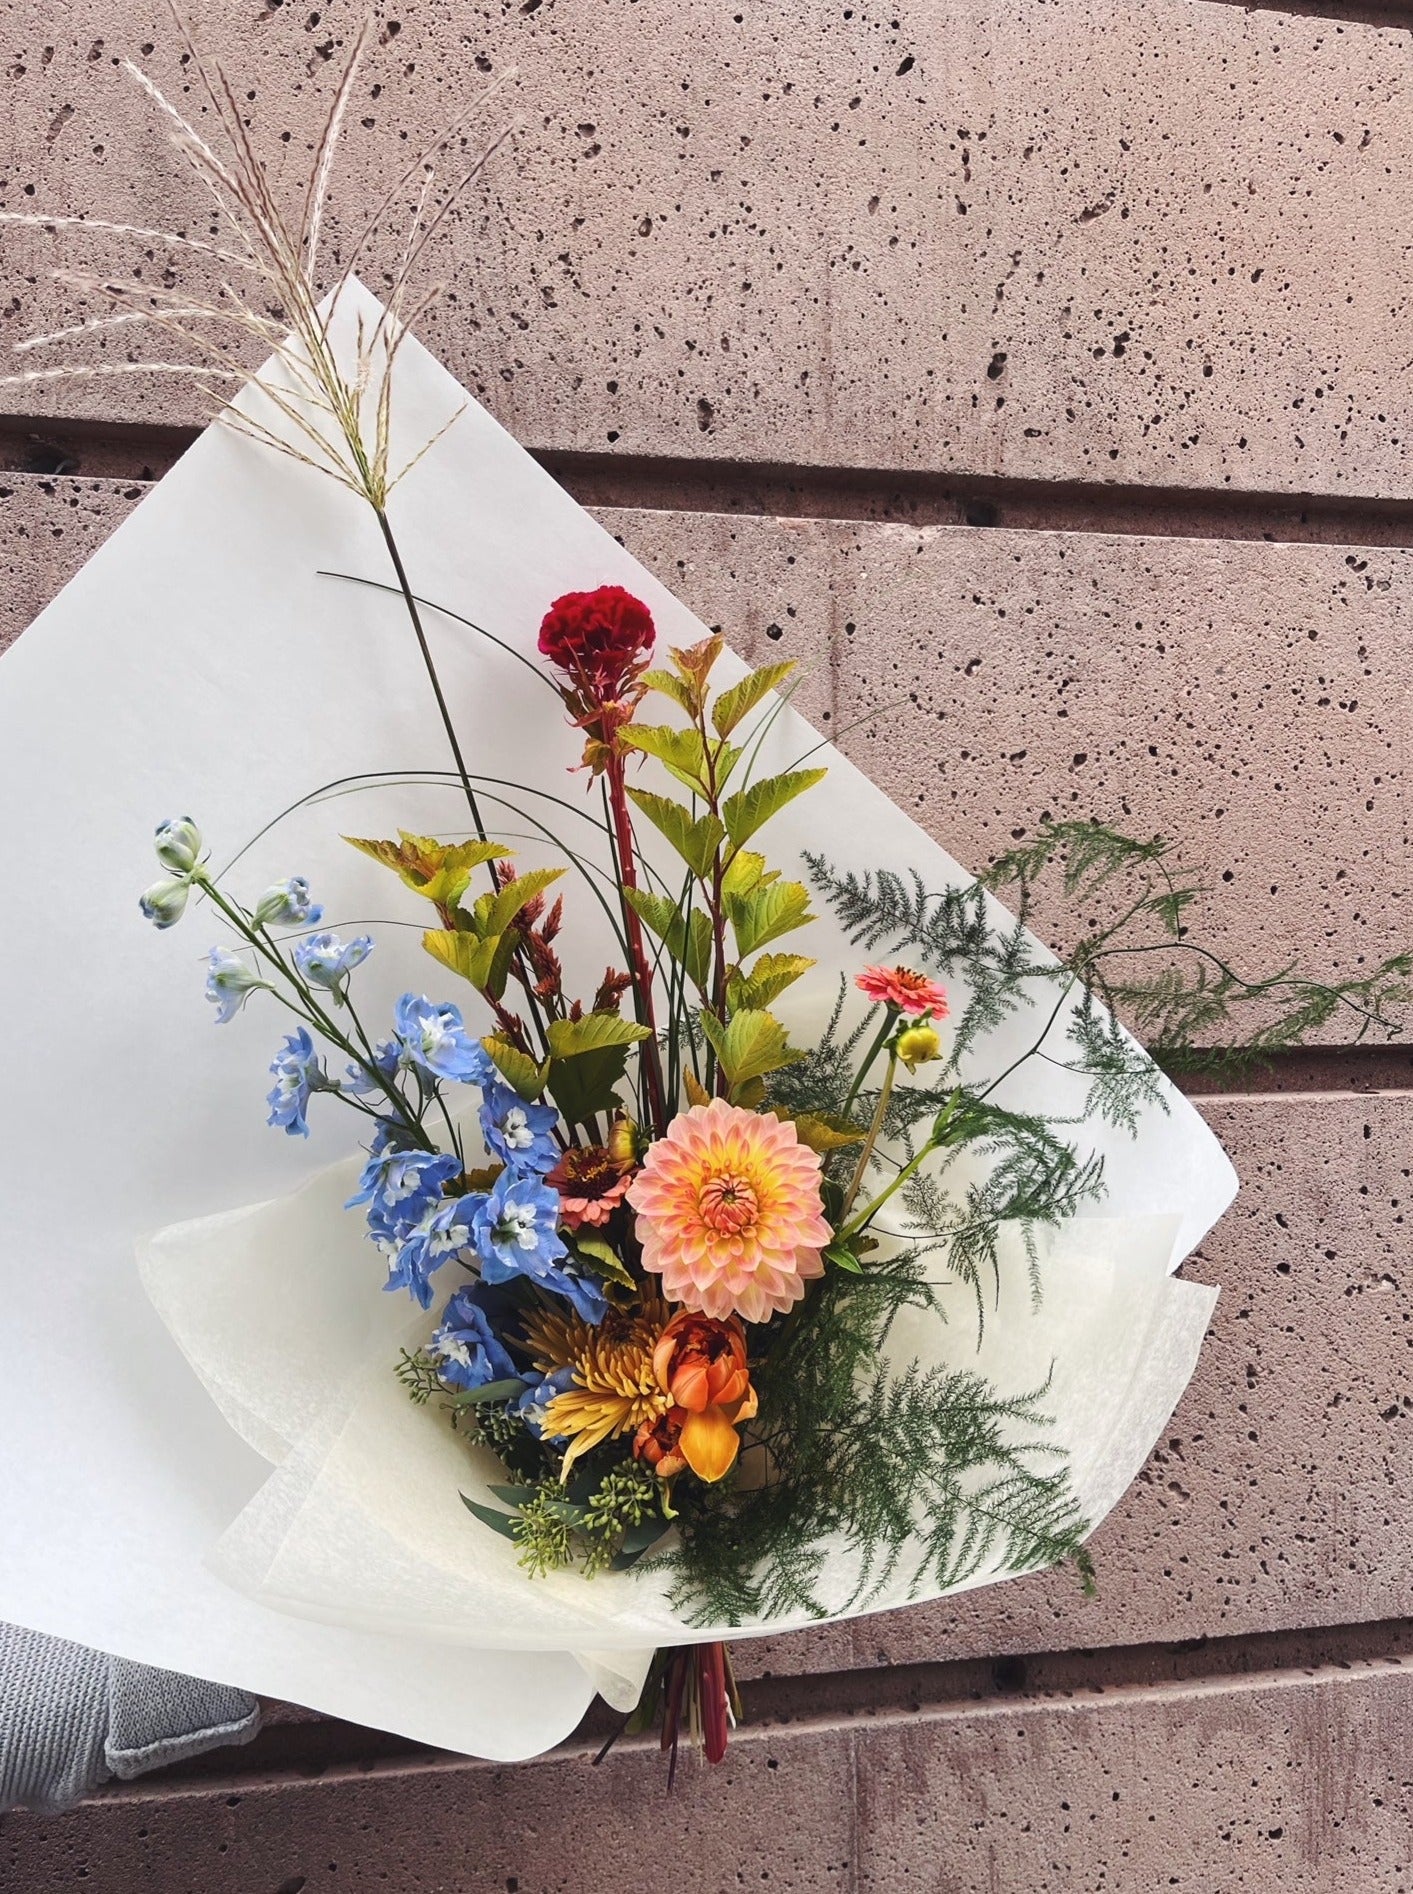 Flower Delivery Vancouver-The Wild Bunch Bouquet-Flower Bouquets-Florist-The Wild Bunch Flower Shop